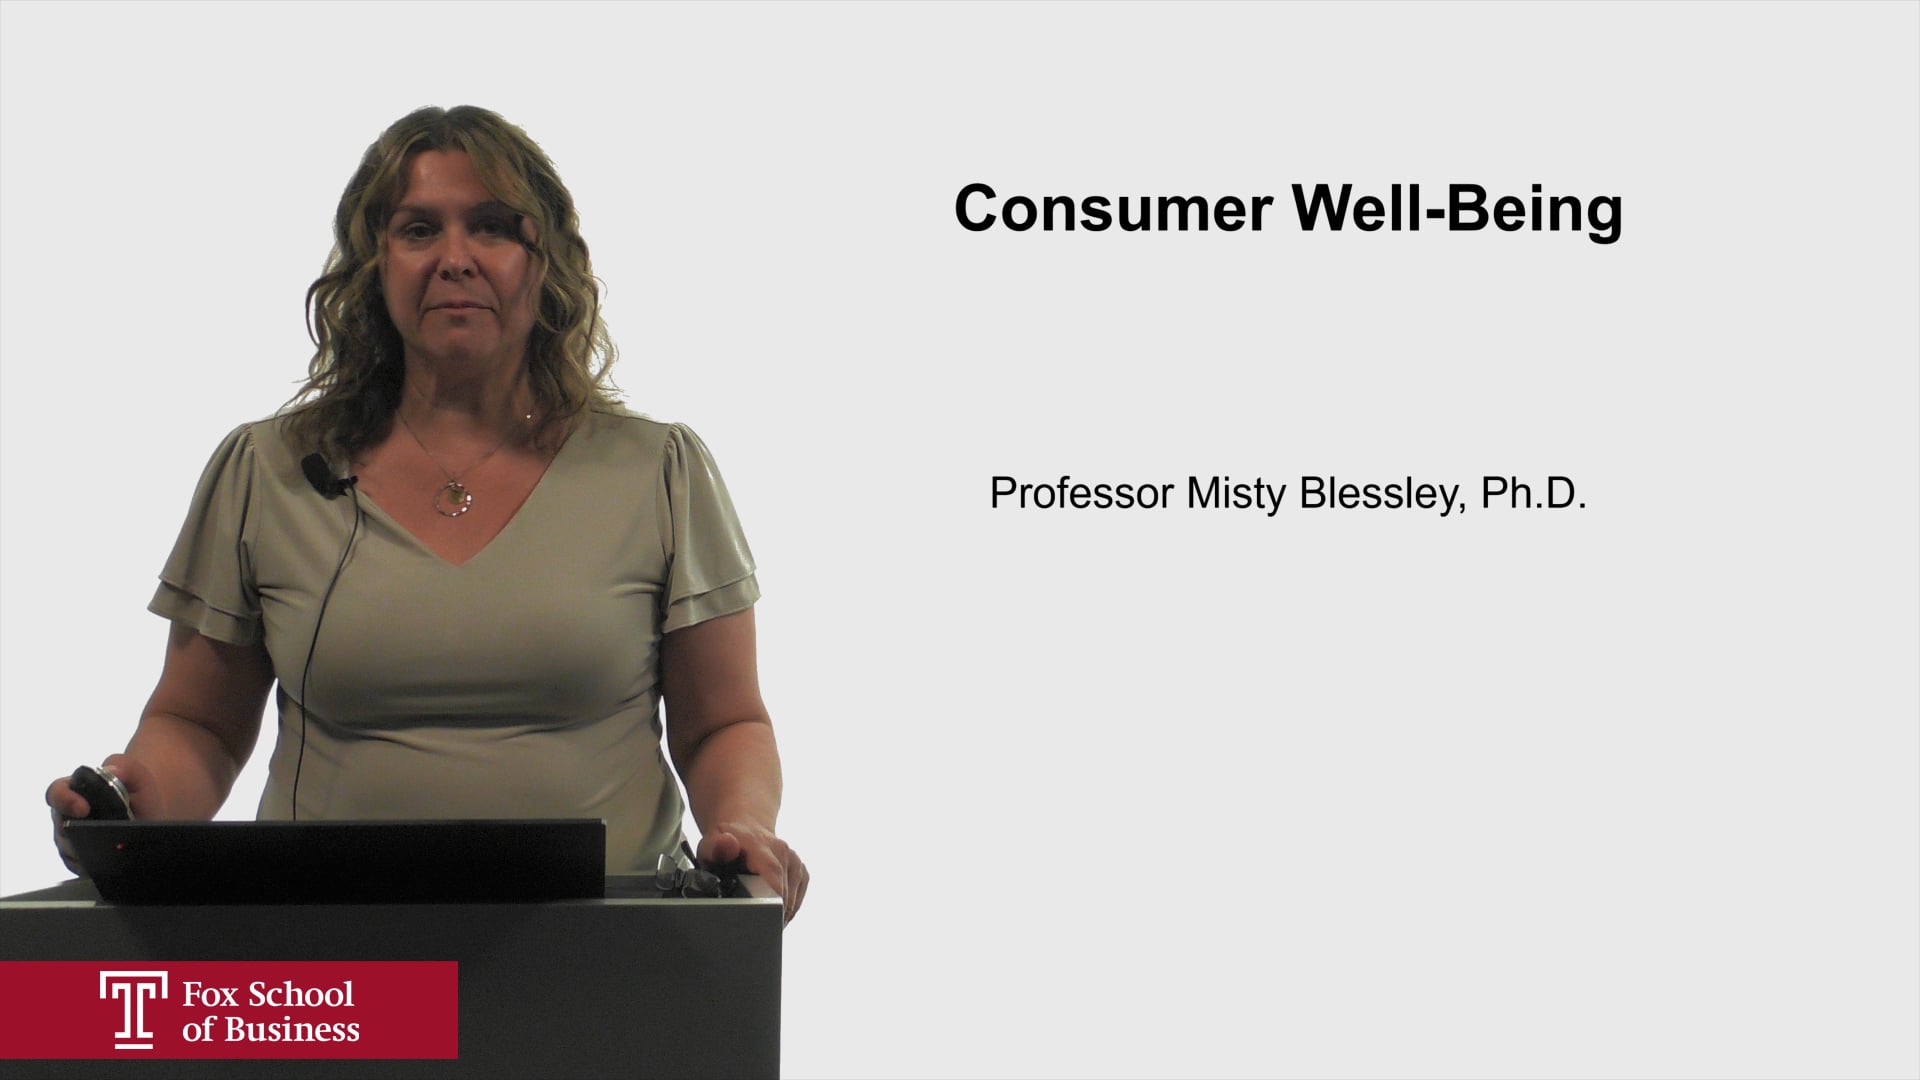 Consumer Well-Being